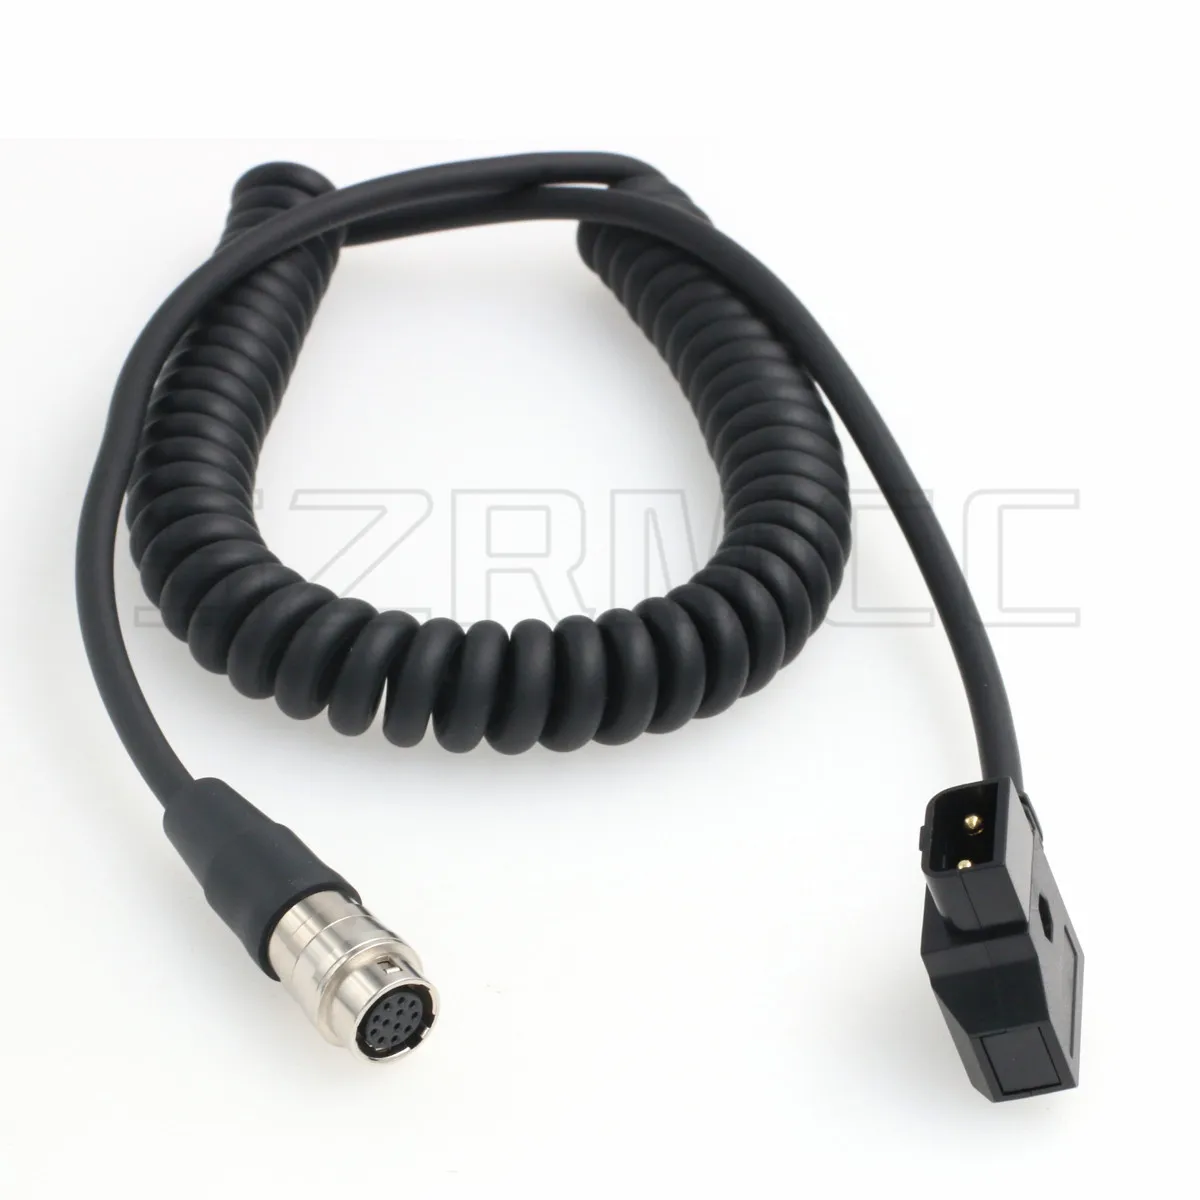 Coiled Cable SZRMCC D tap to 12Pin Hirose Female Coiled Cable for GH4 Power B4 2/3 Fujinon Nikon Canon Lens 